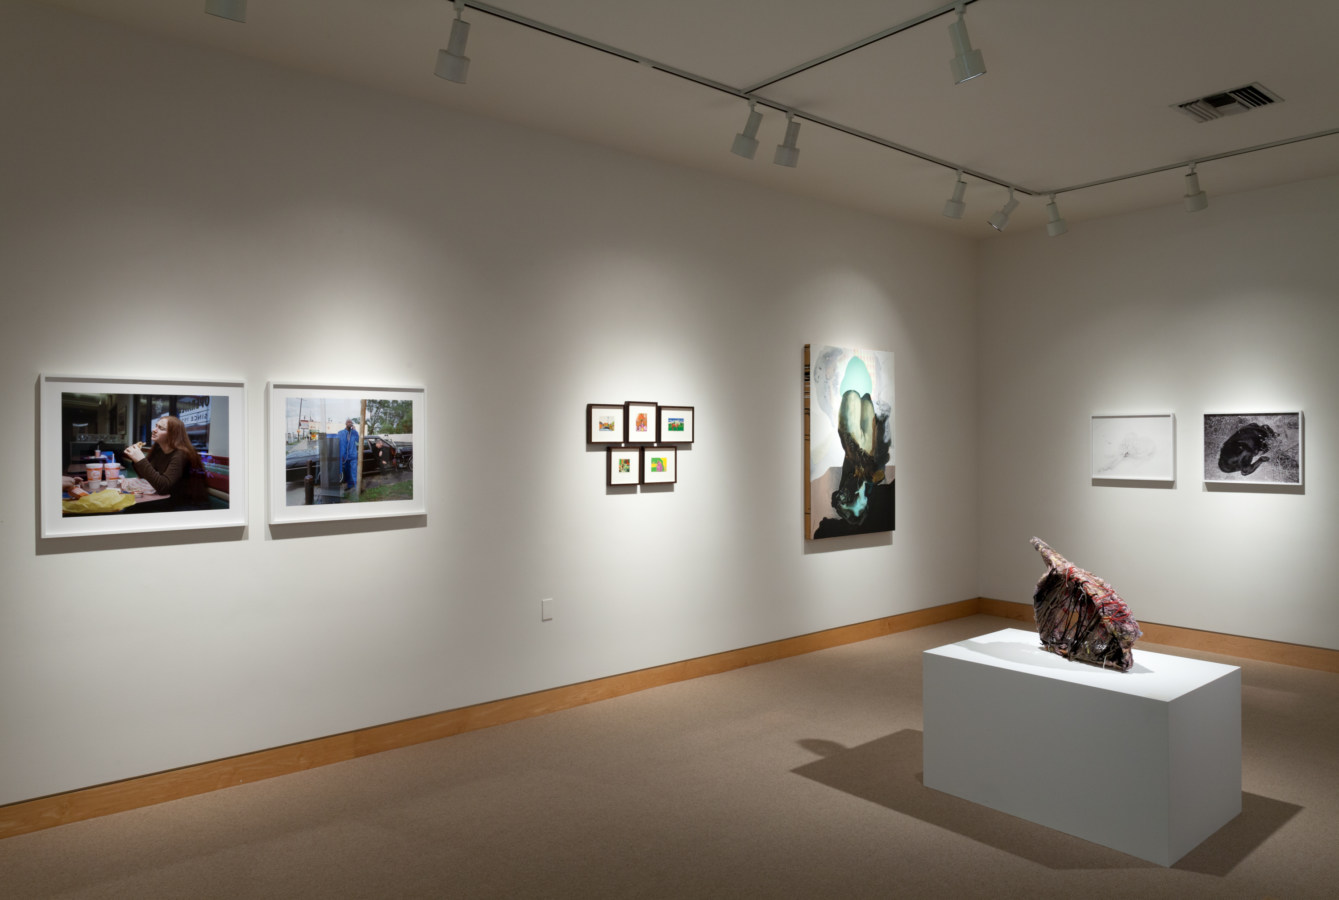 Color image of exhibition depicting artworks both framed and sculptural within gallery